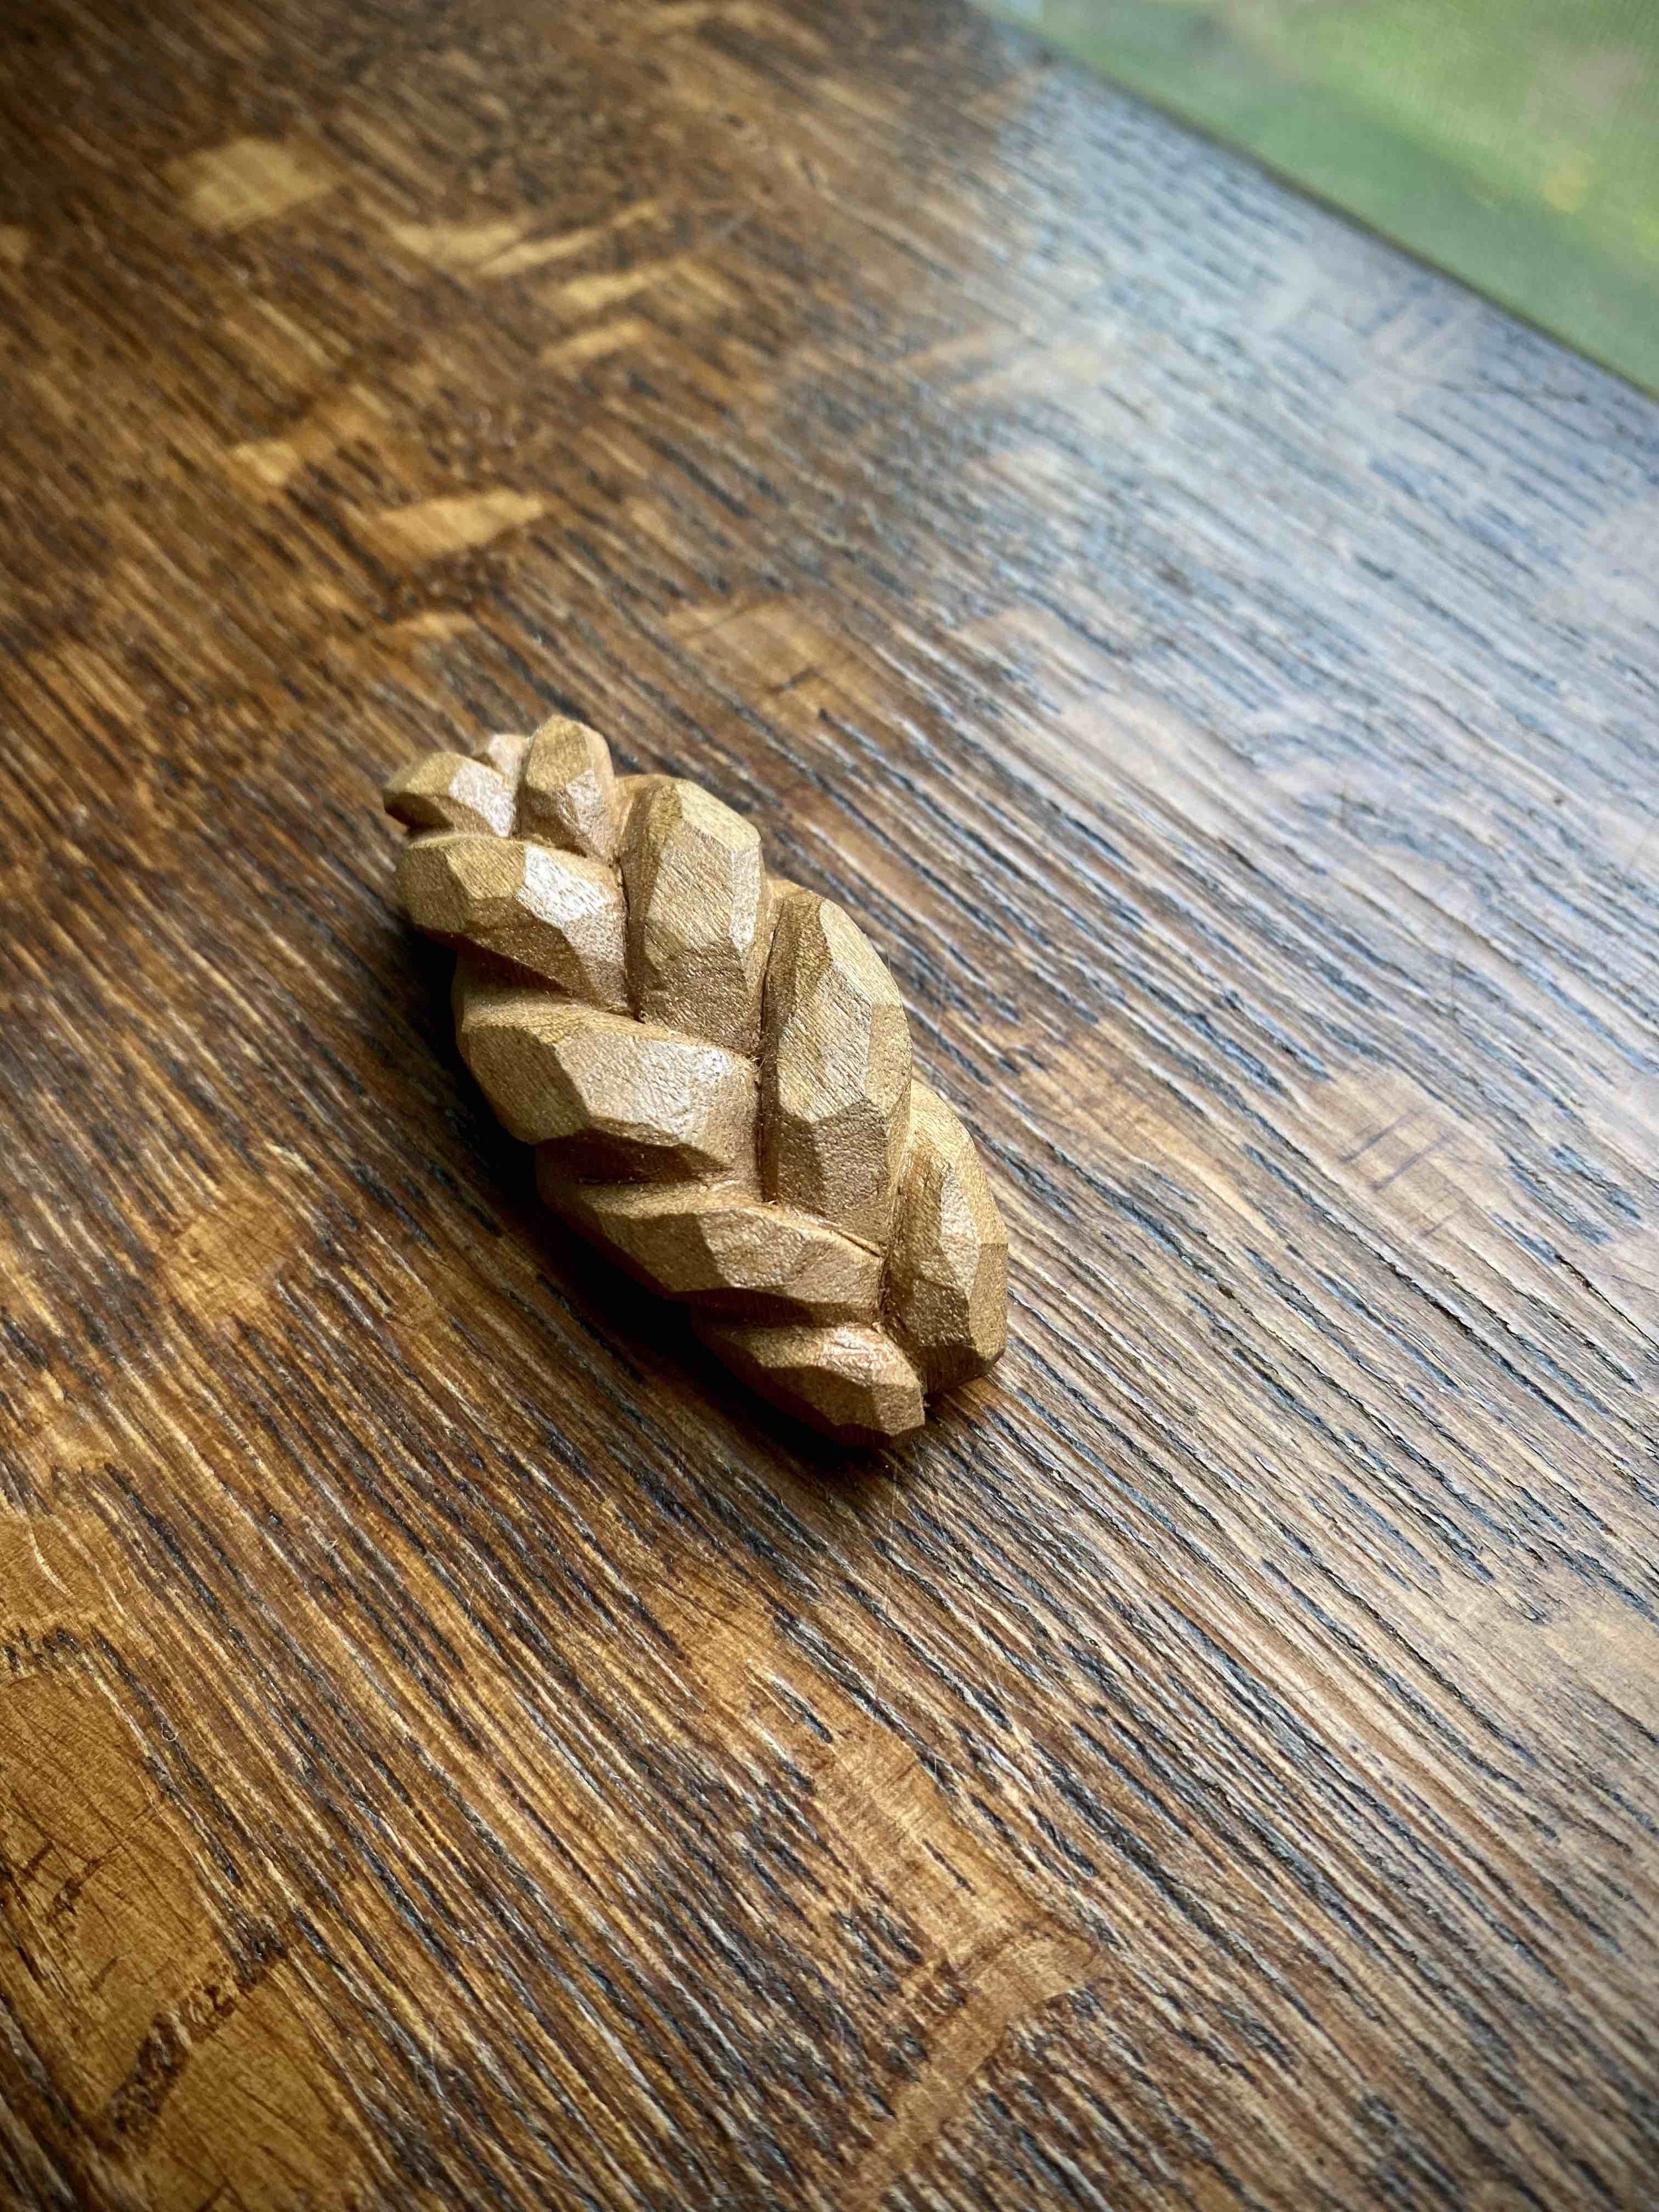 Small Wooden Challah Hand Carved.jpg